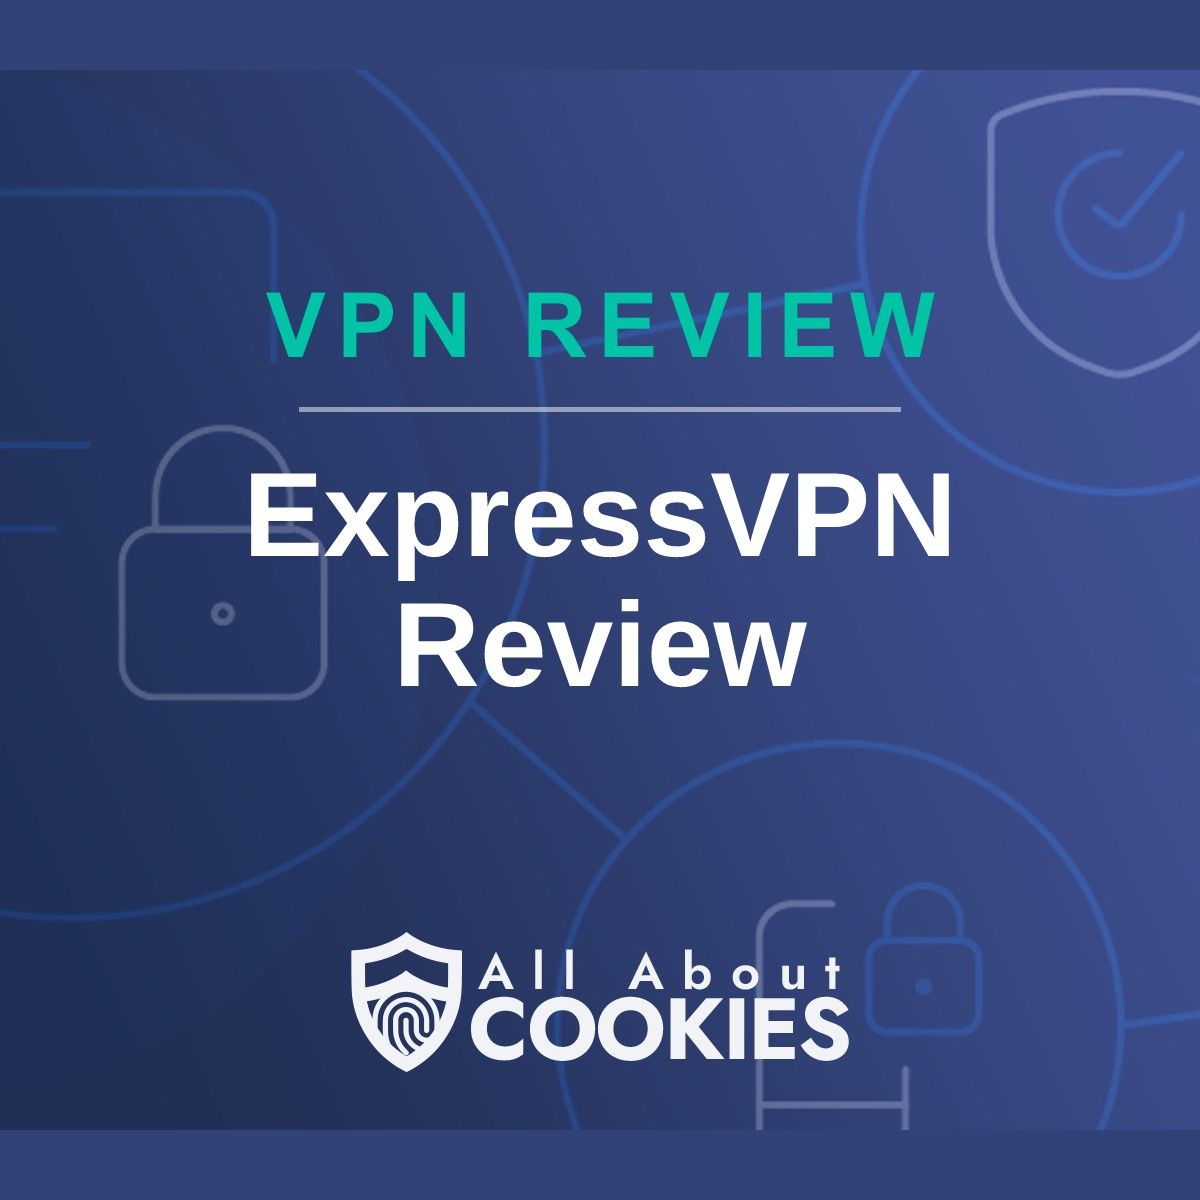 A blue background with images of locks and shields with the text &quot;ExpressVPN Review&quot; and the All About Cookies logo. 